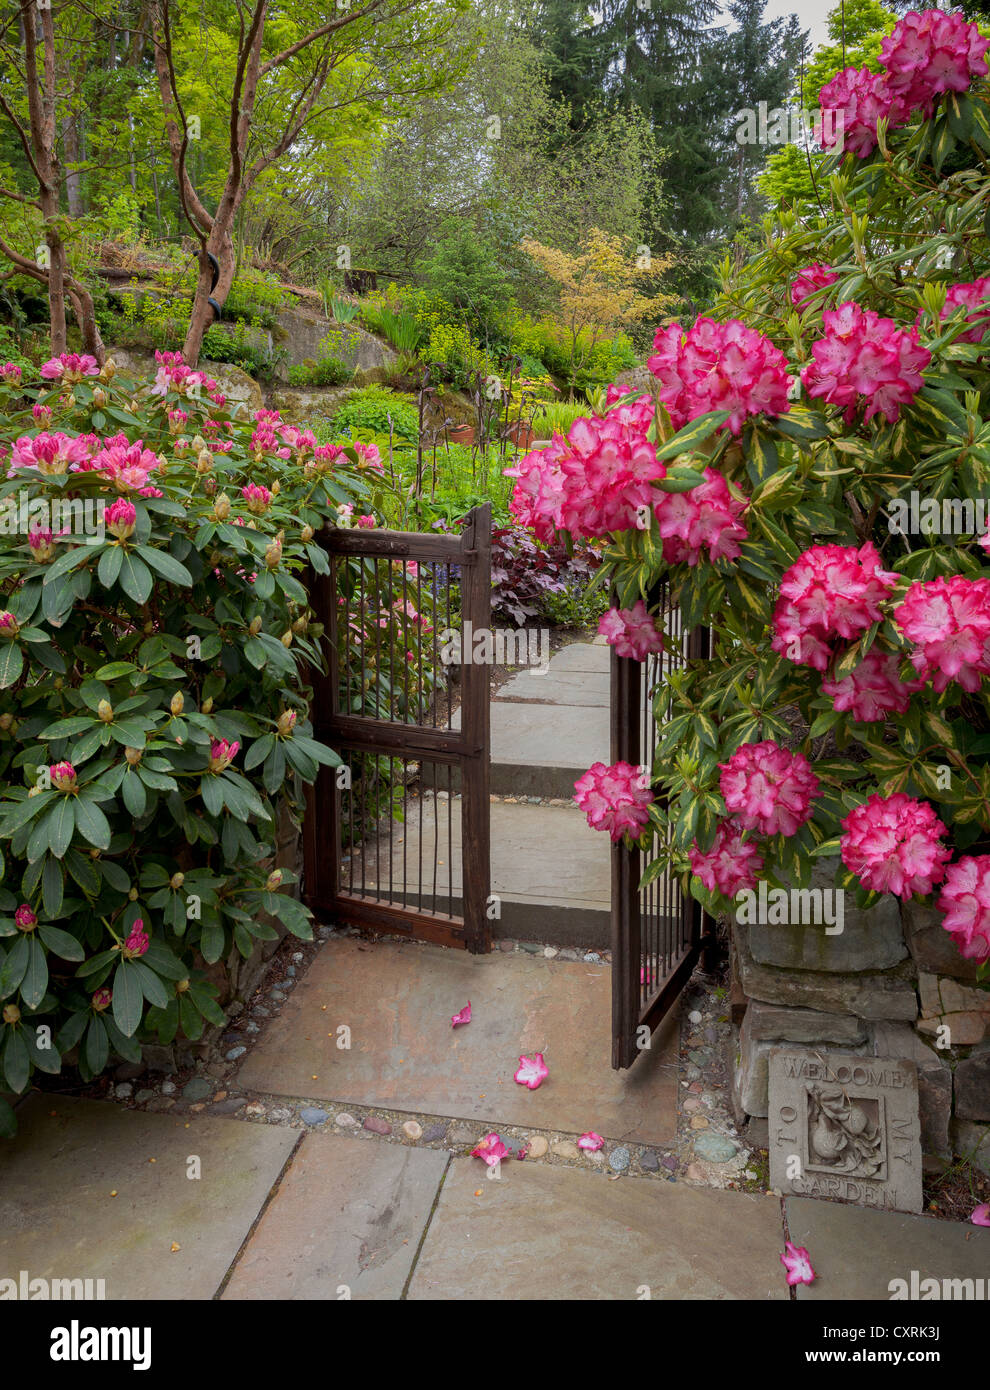 Rhododendrons 'President Roosevelt' blooming against a wooden gate beckoning visitors into a secluded garden Stock Photo